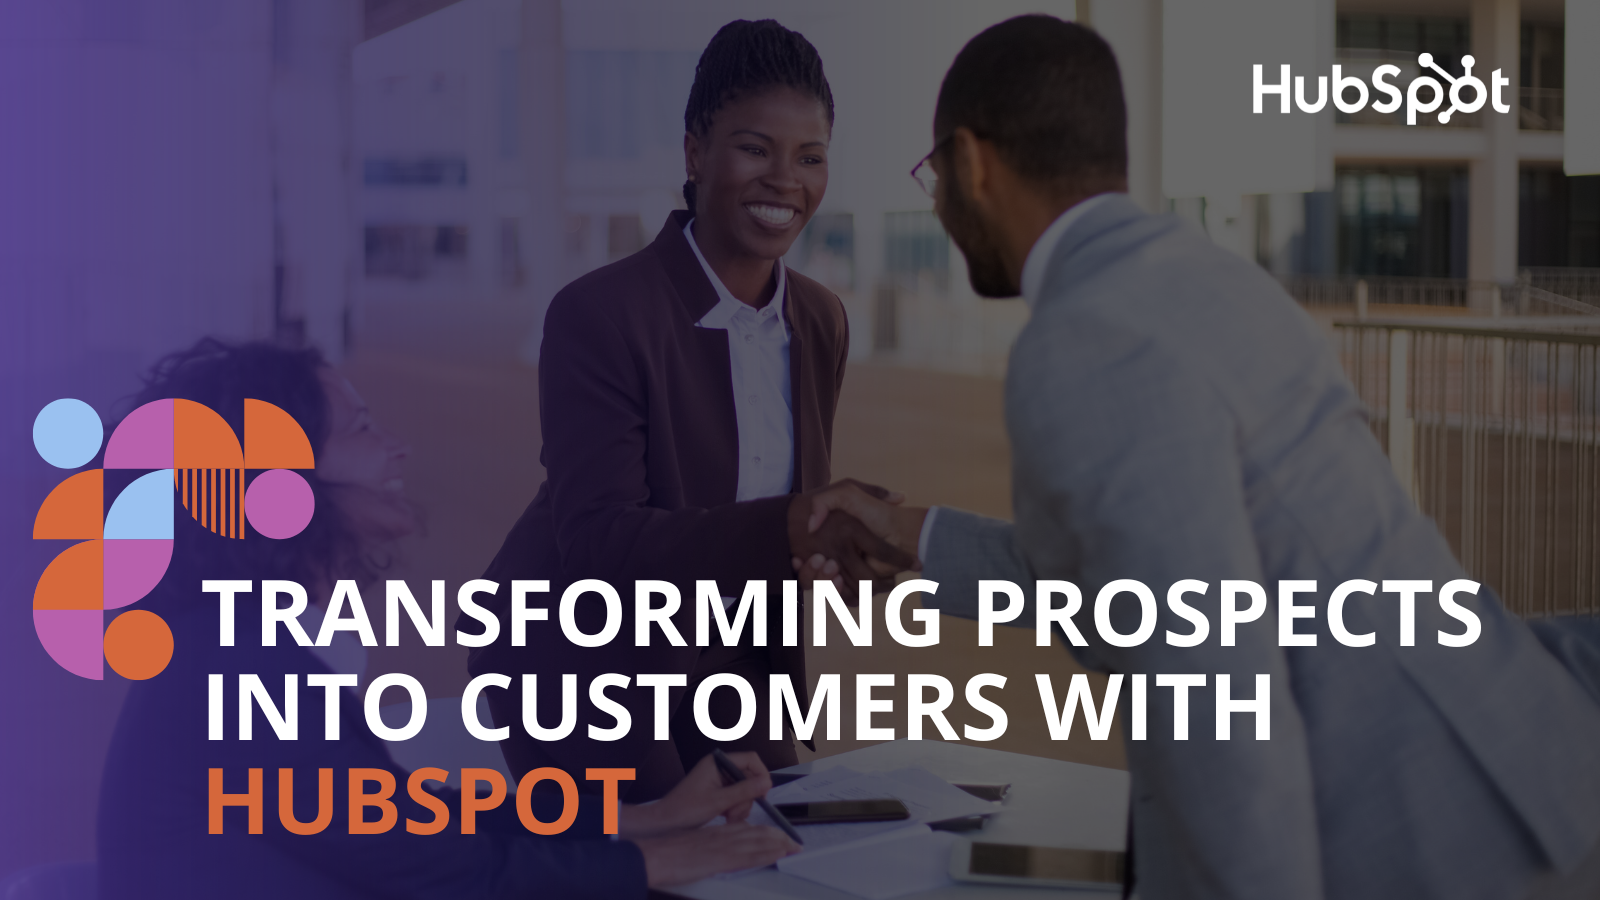 Transforming Prospects into Customers with HubSpot